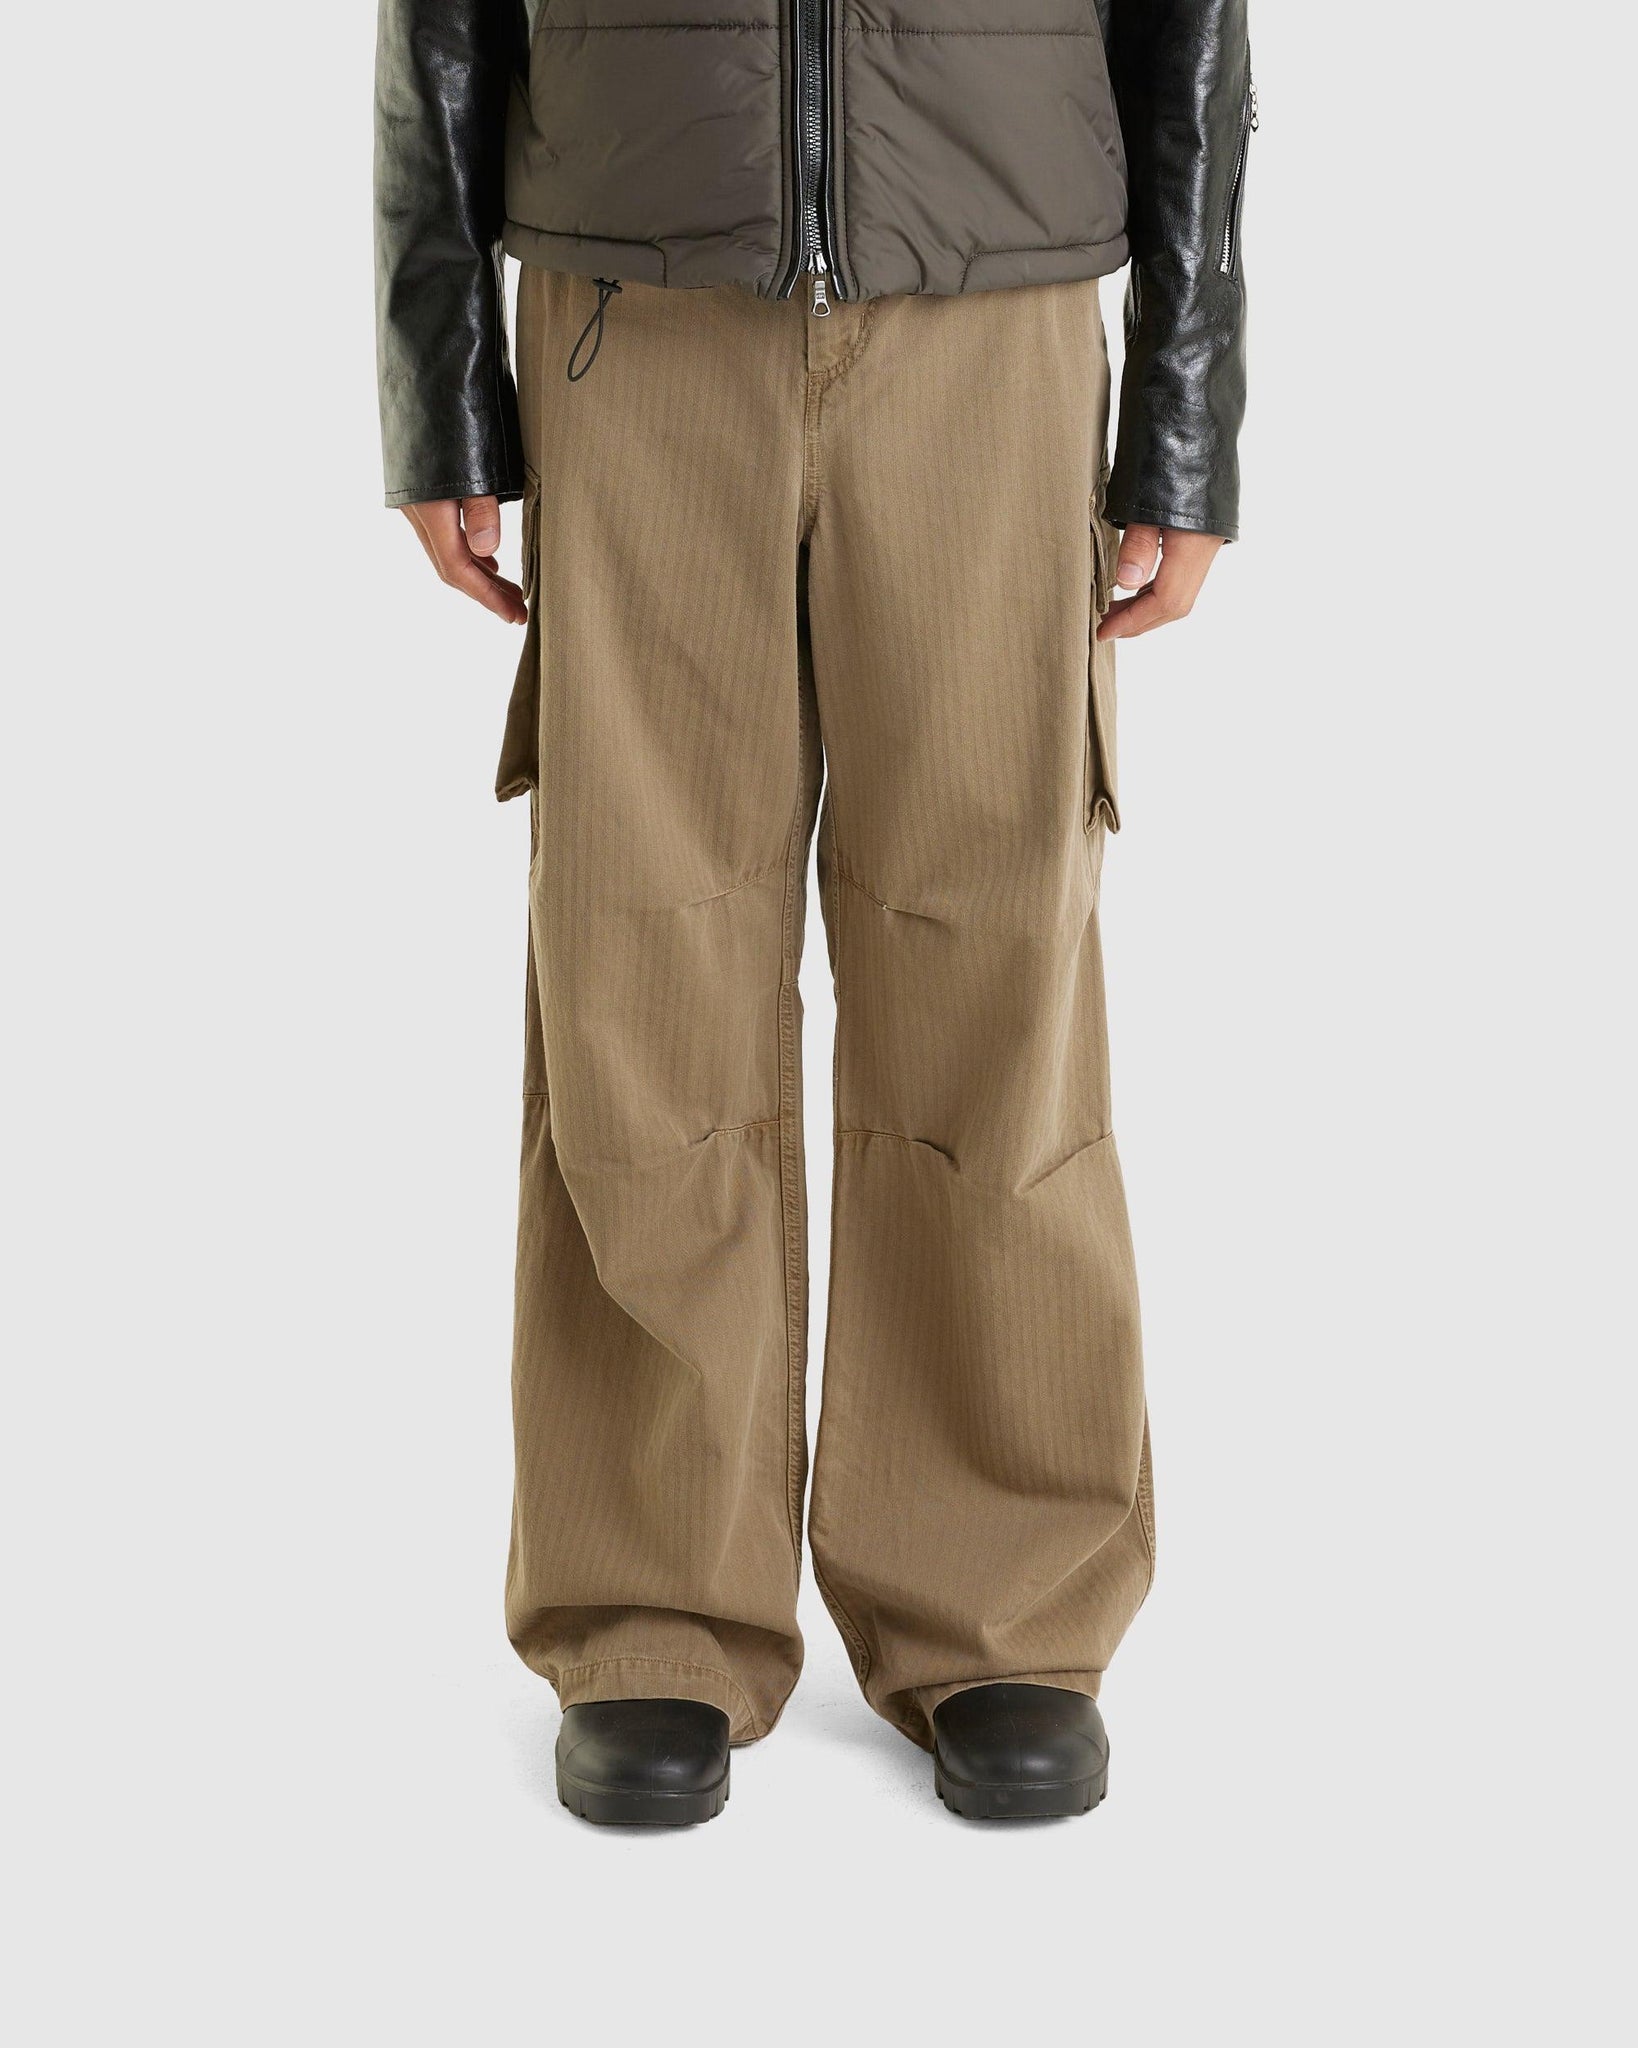 Mount Cargo Pants Uniform Olive Herringbone - {{ collection.title }} - Chinatown Country Club 